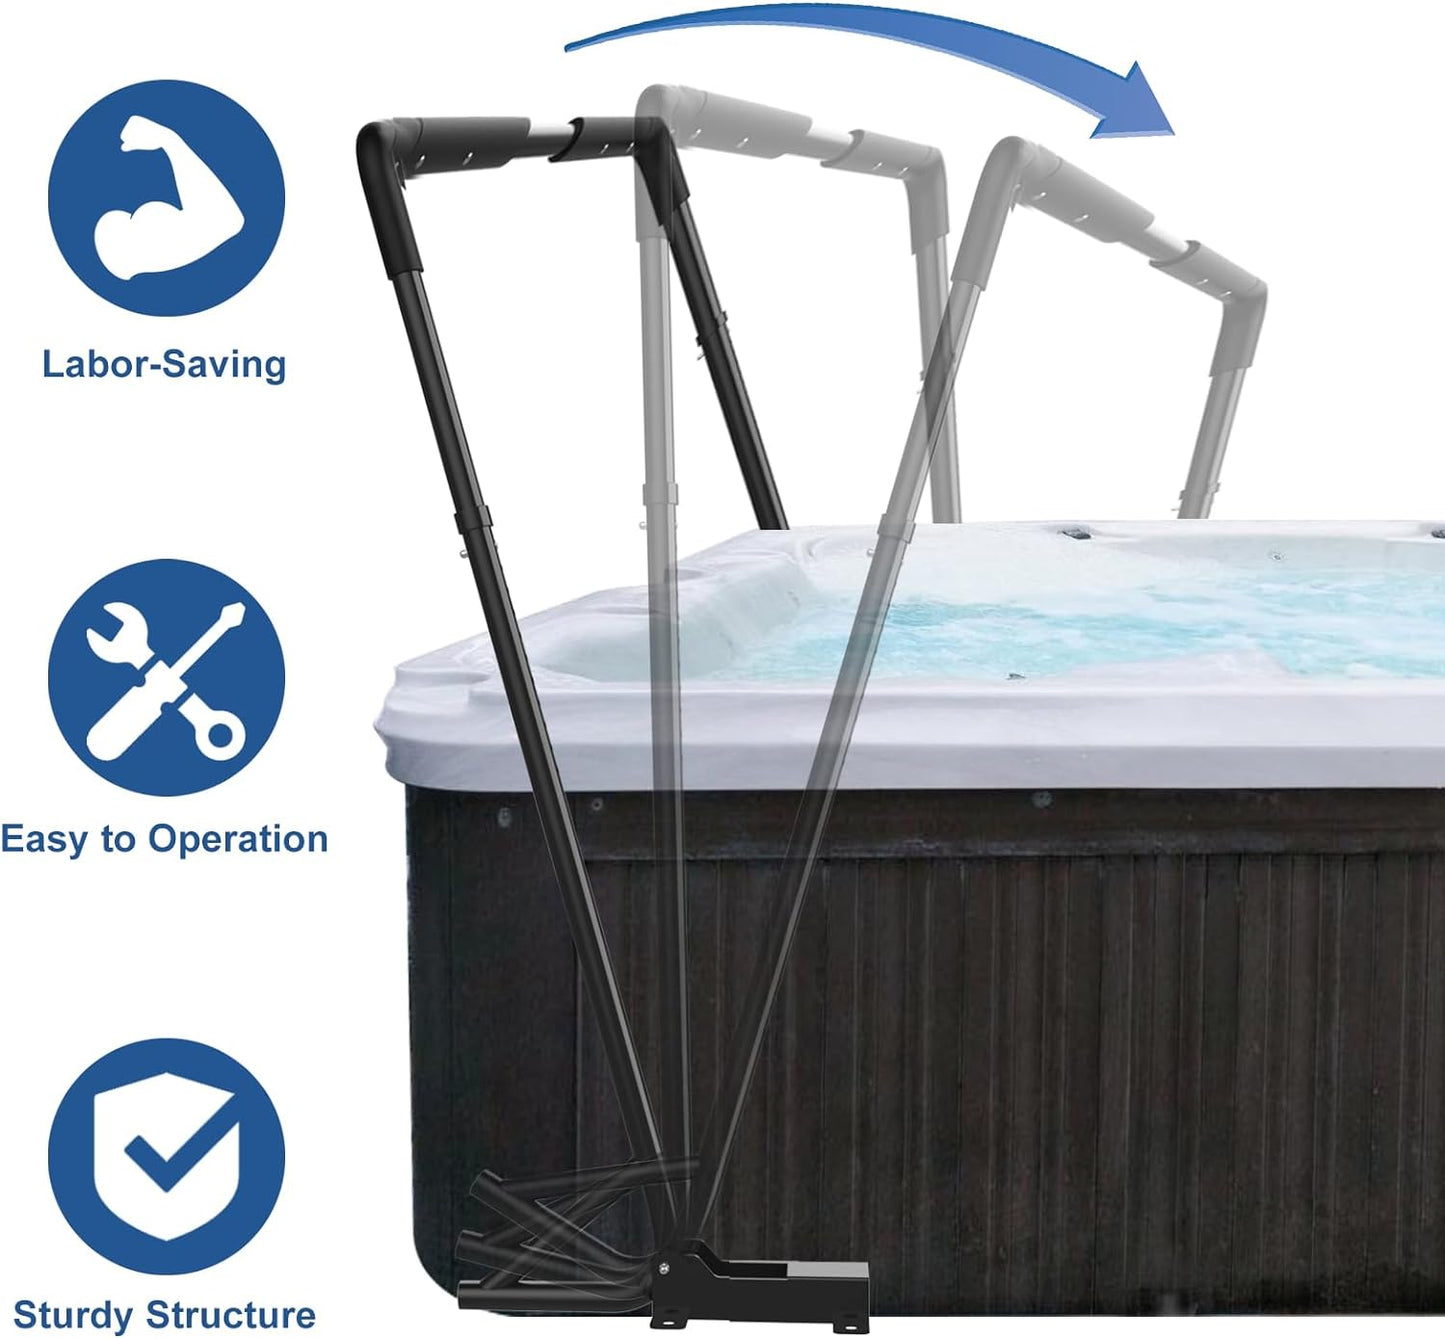 Hot Tub Cover Lifter, Spa Cover Lift, Hot Tub Cover Lift Removal System Height 31-41 Inch Adjustable, Fit for Most Spa Hot Tubs